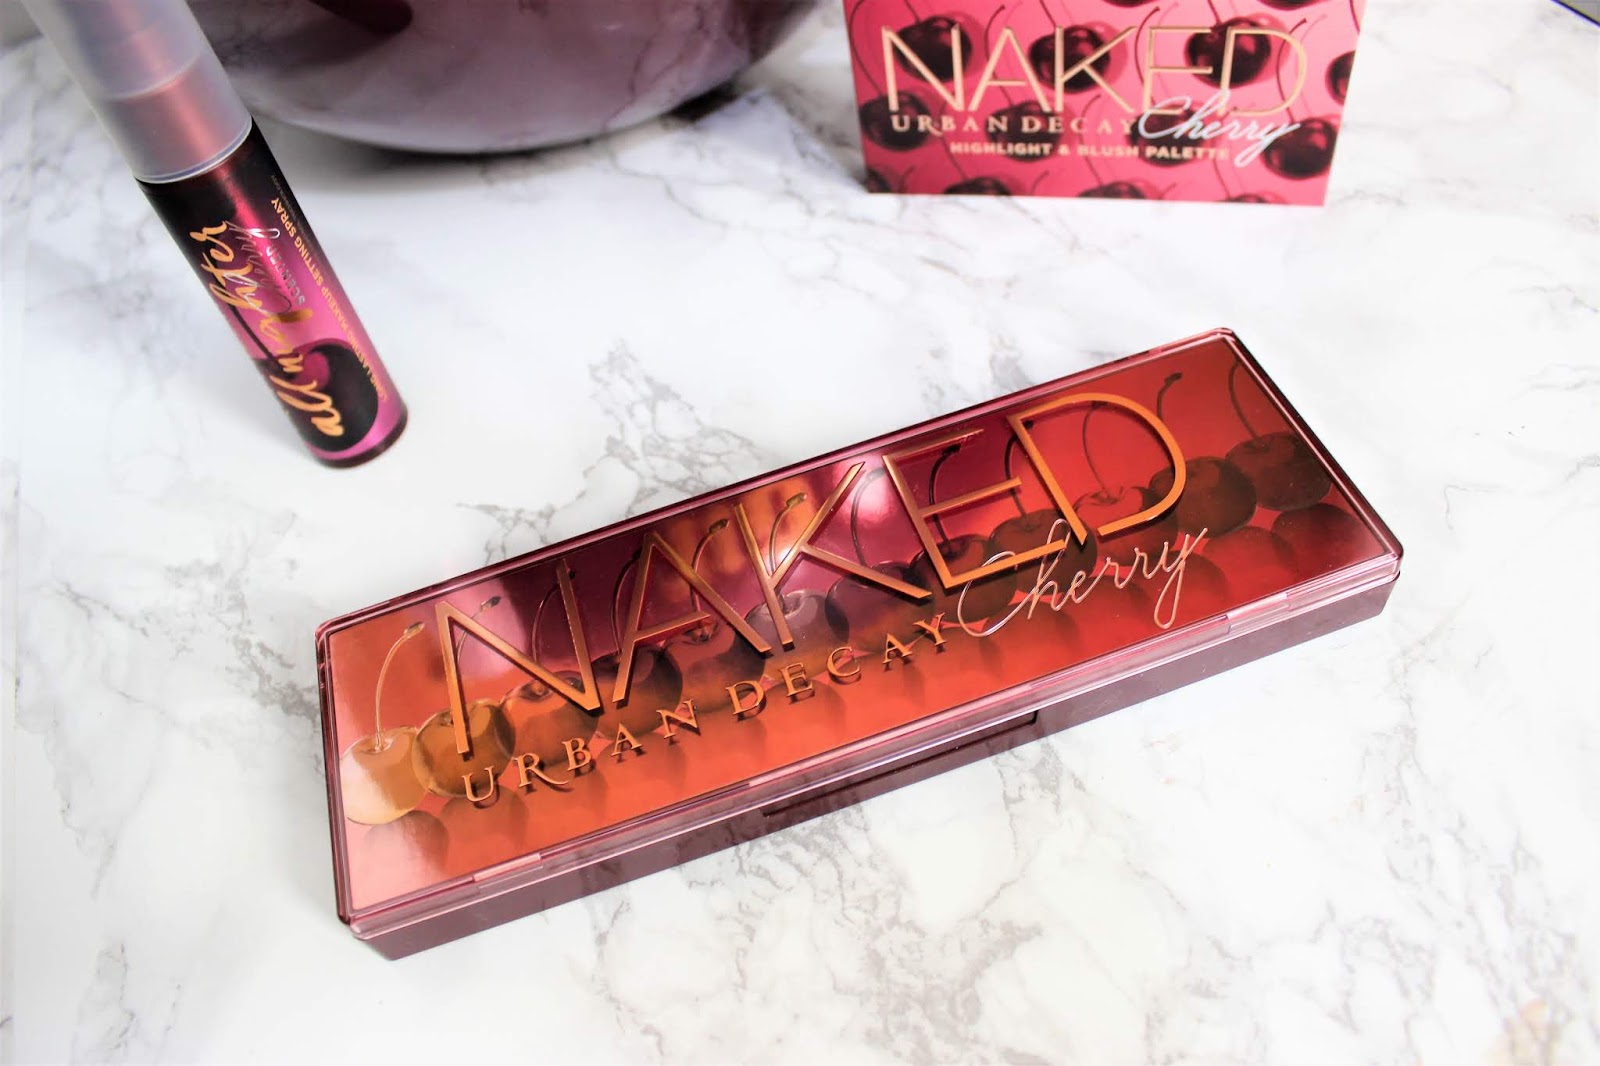 Urban Decay Naked Cherry review